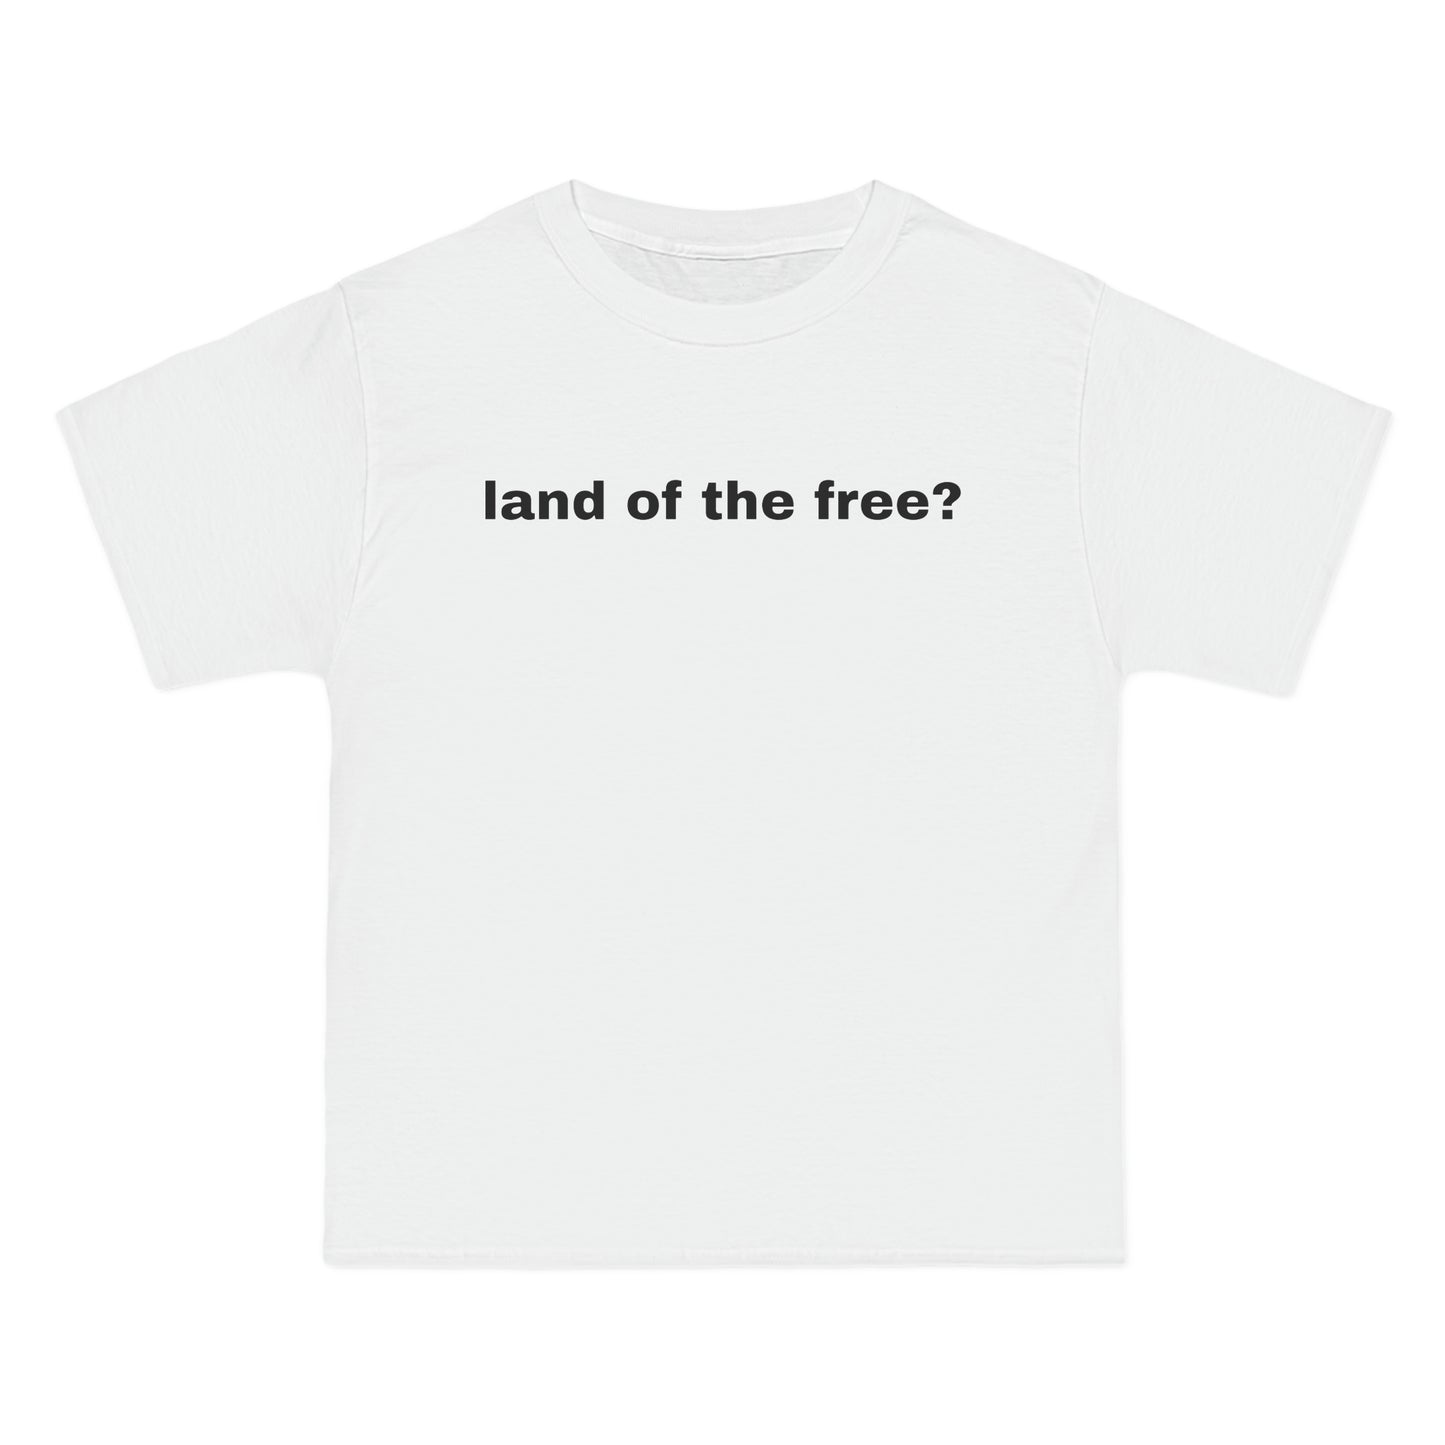 land of the free? Tee